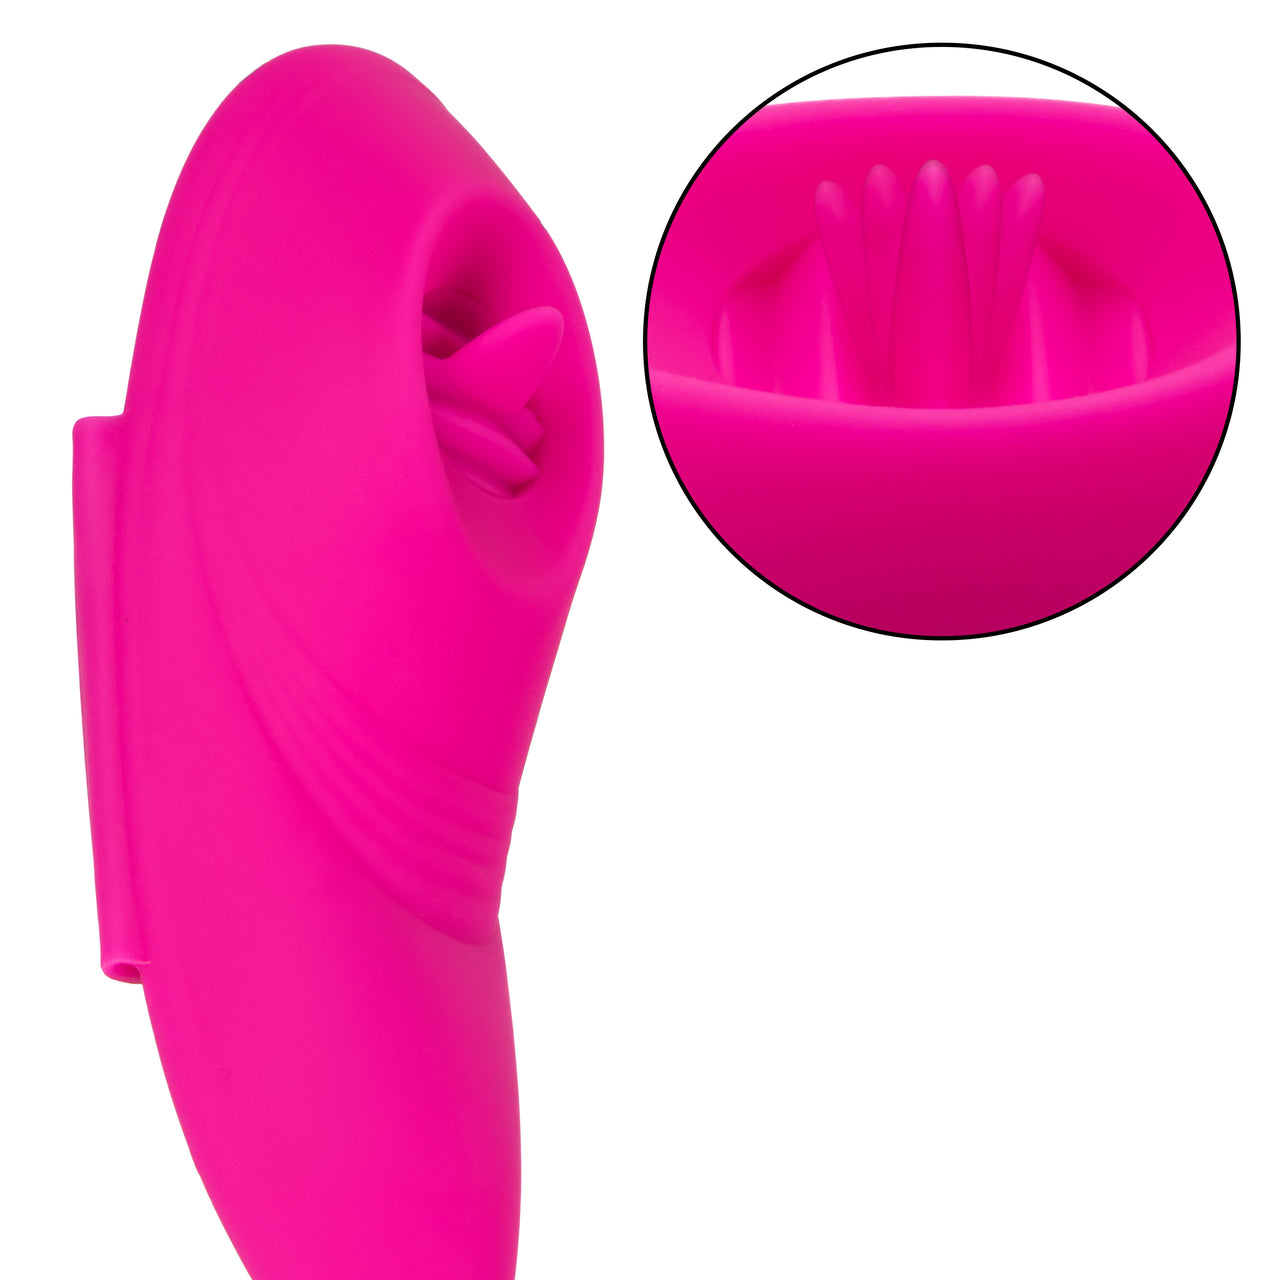 Lock-N-Play Remote Flicker Panty Teaser - Thorn & Feather